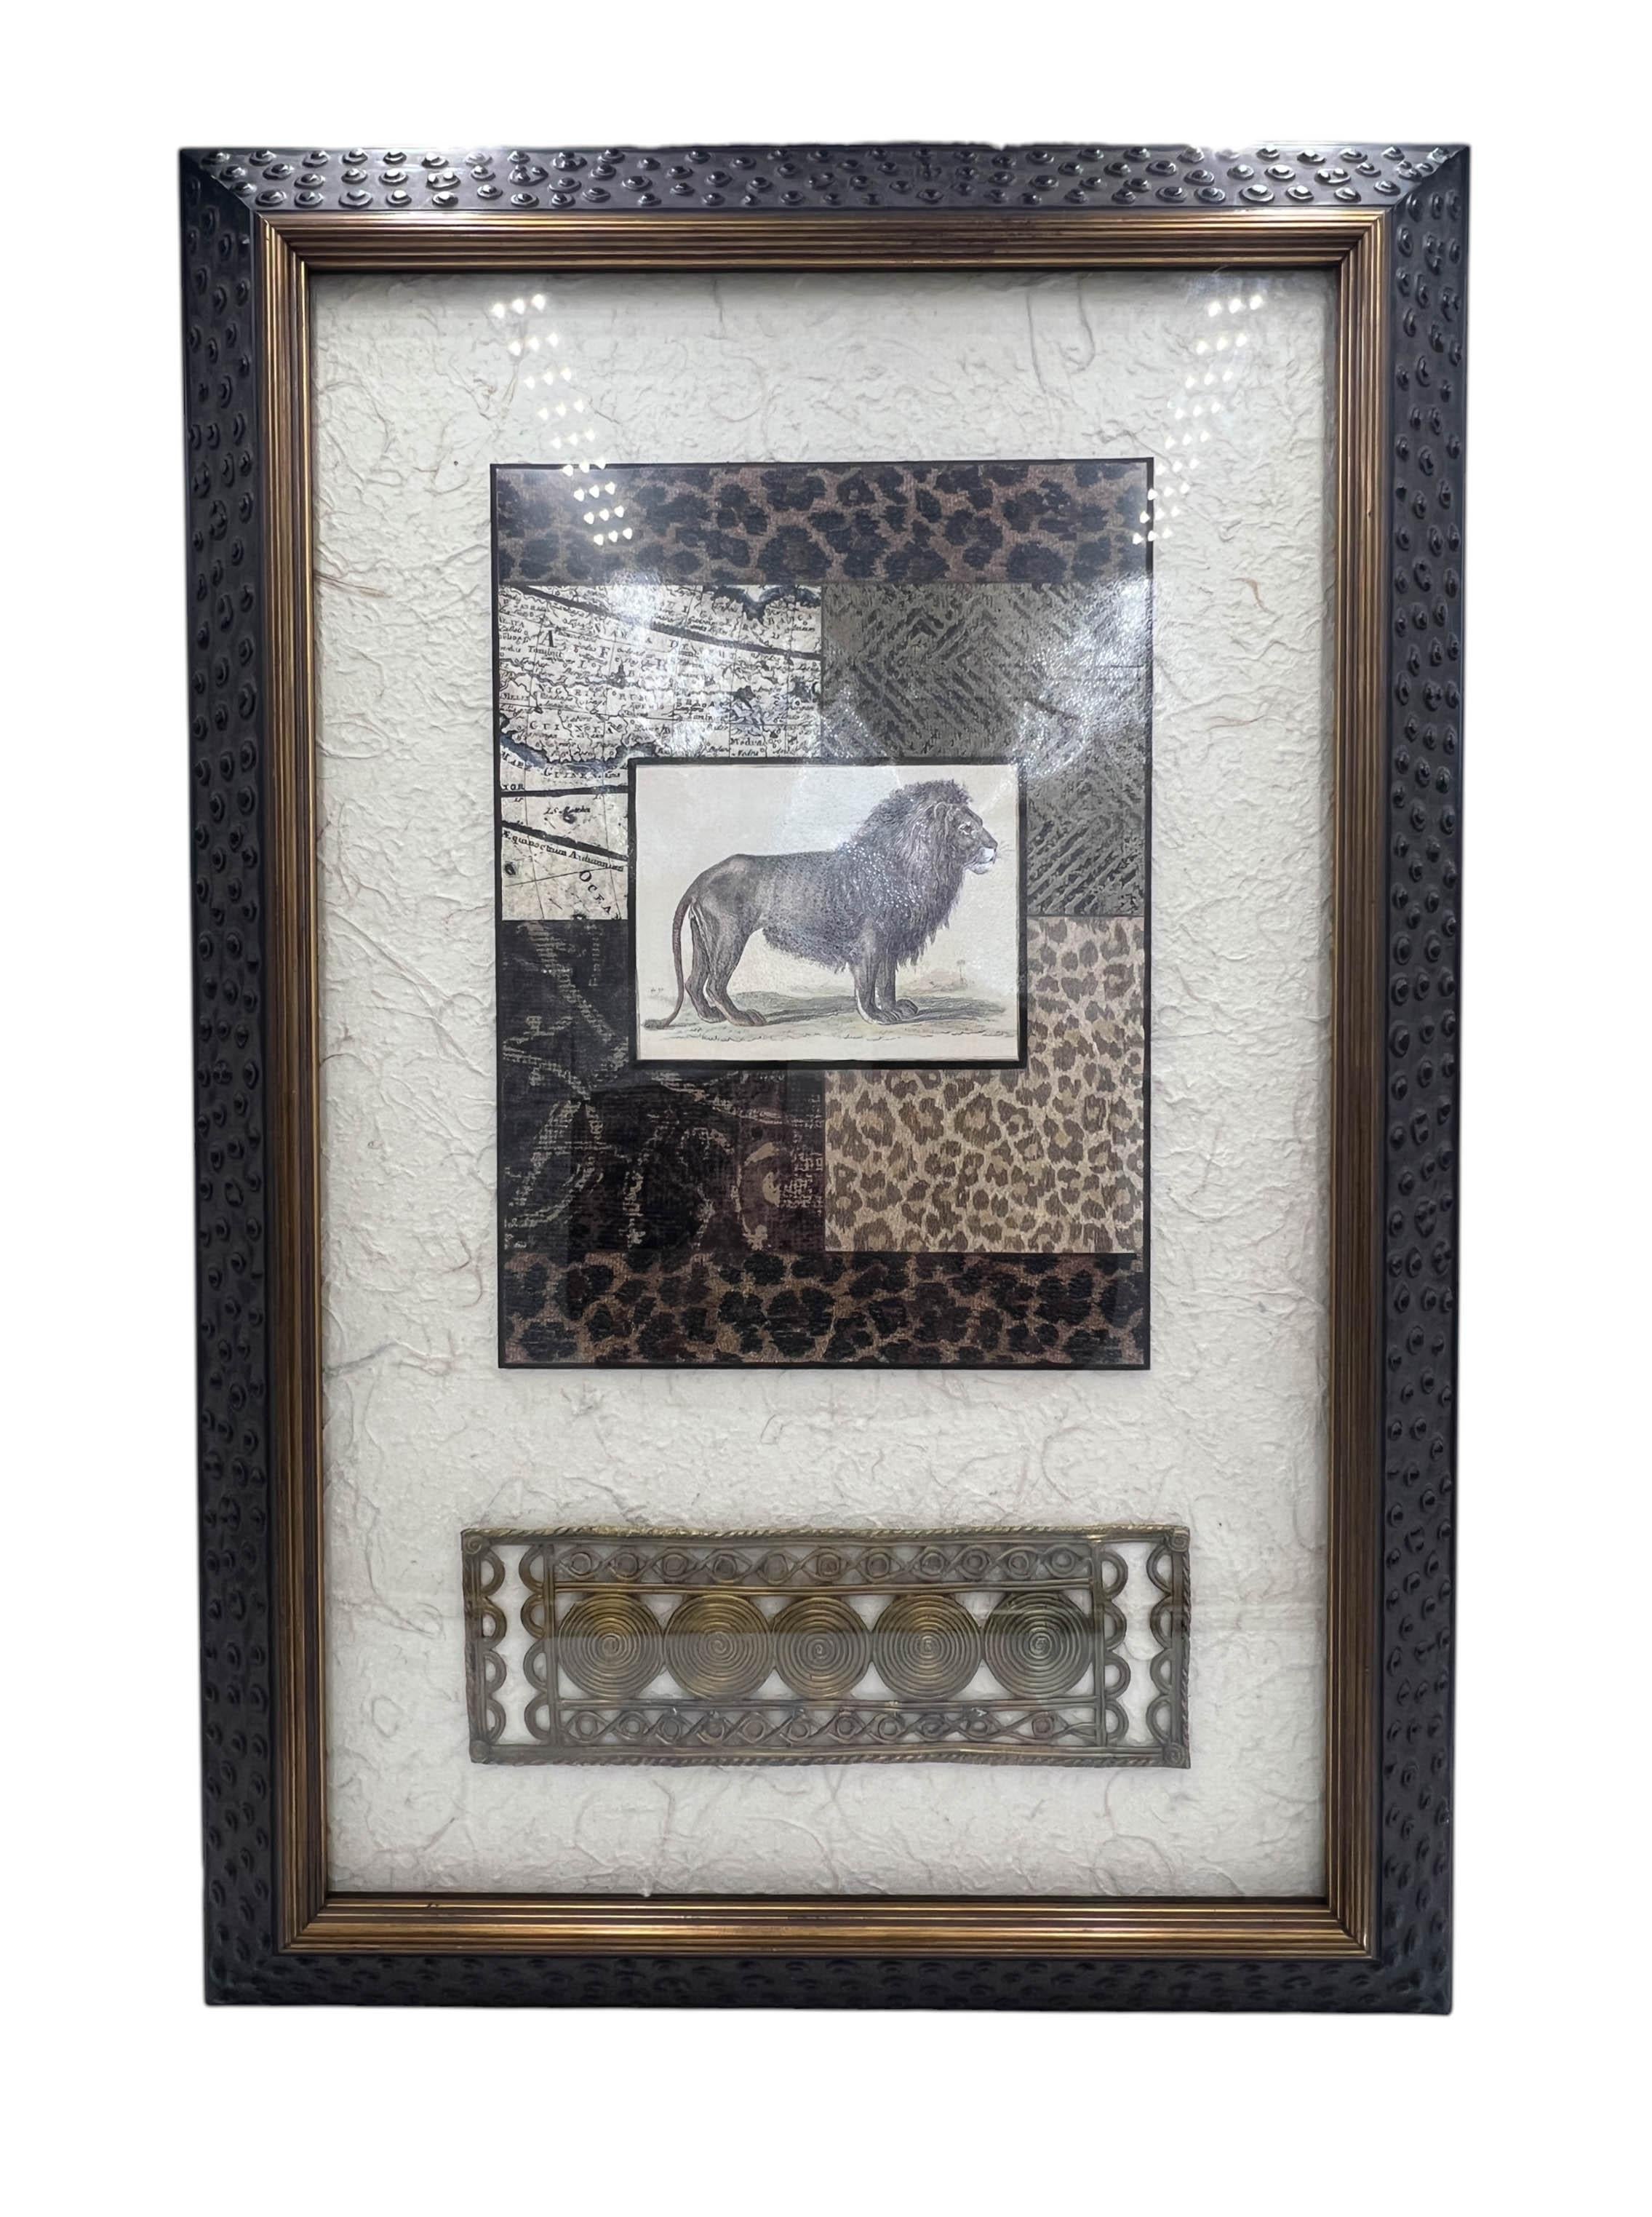 A  mixed media collage by design house JOHN RICHARD. This piece combines elements of nature, featuring a depiction of a lion crafted on bark paper. The collage is encased behind glass and  framed in an ostrich-style frame made of bone. Using mixed